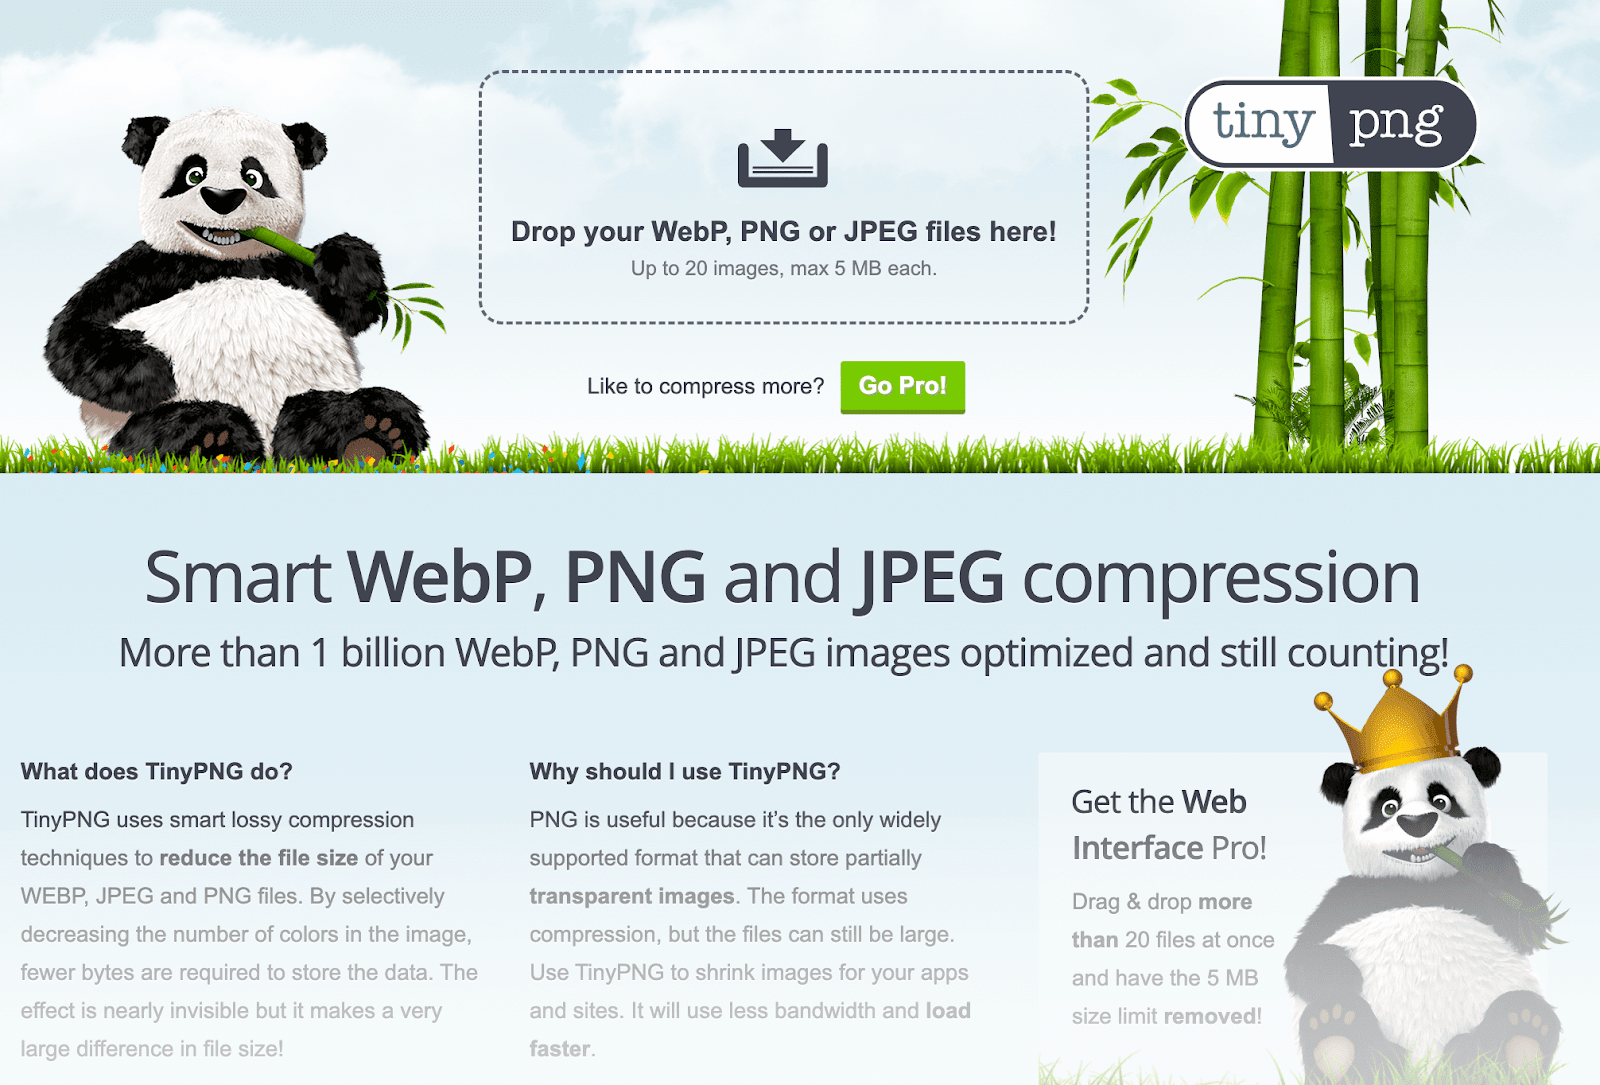 TinyPNG homepage